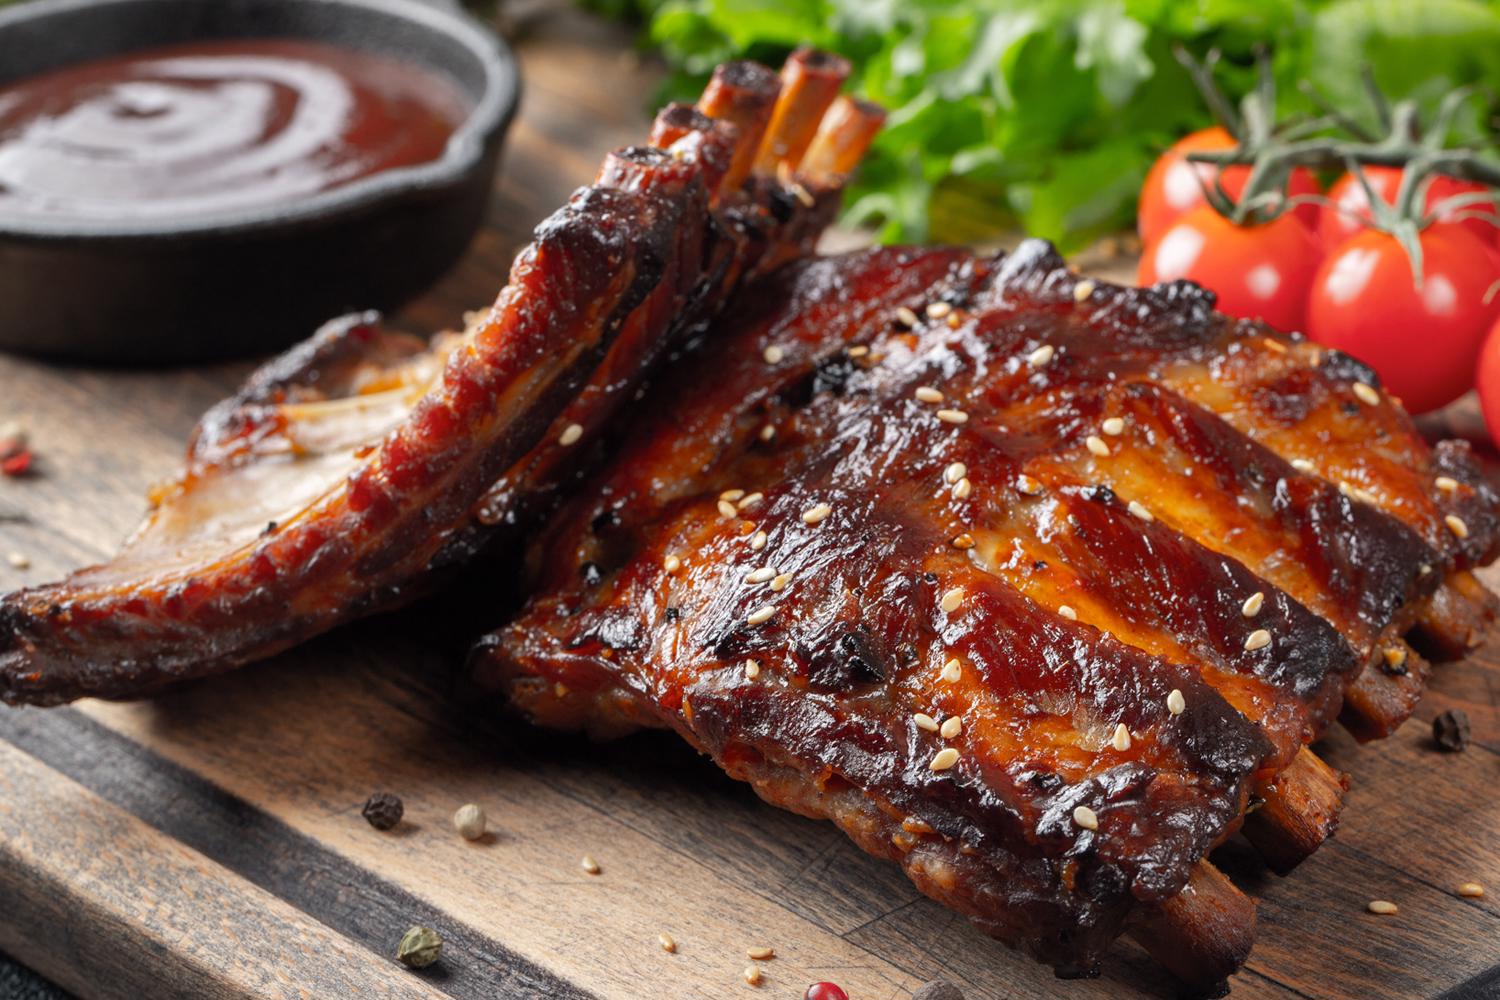 Chinese Spare Ribs 4 racks - Slow Cooked Meats